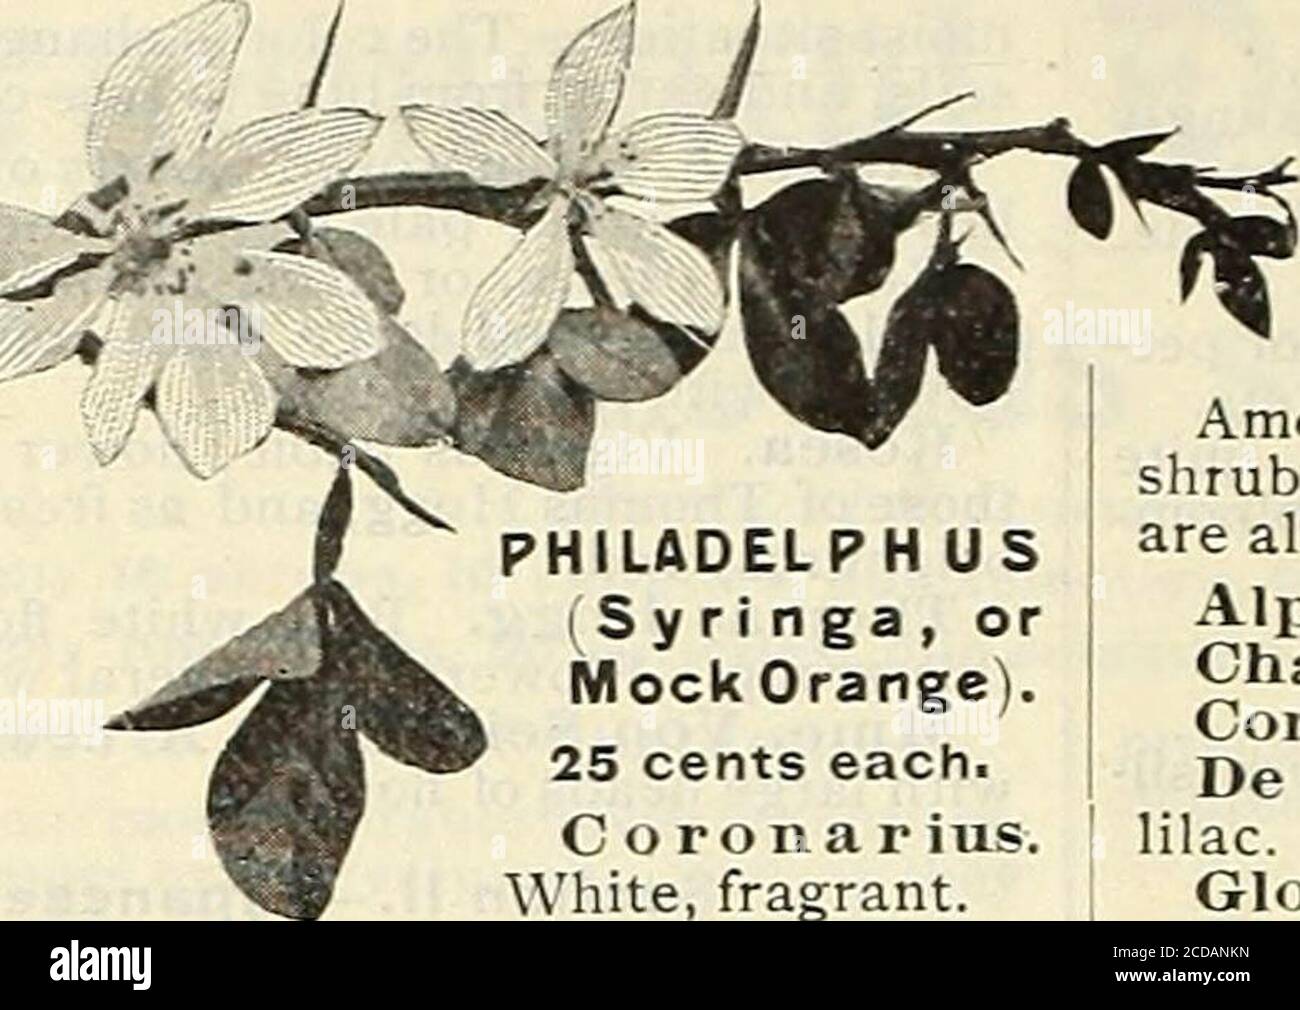 . Fruit and ornamental trees, roses, etc . Ml. LIMONIUM TRI- FOLIATUM.(From photograph atFruitlands ) LADELPH USringa, ork Orange),nts each,o n a r ius.fragrant.Dianthiftorus. Semi-double.Gordonii. White, large ; bloomslate. Grandiflorus. Very large flowers. Multiflora plcena. Flowerswhite, double, fragrant. Primulseflora. Flowers white,semi double. Rosseflorus pi. Double. PUNICA GRANATUM. (Pomegranate.)25 cents each.Alba. Double white.Liegrelli. or Variegata. Double-flowering, variegated ; very handsome.Rubra. Double red. PYRUS SALICIFOLIUS (Willow-leaved Pear). Of medium growth and weeping h Stock Photo